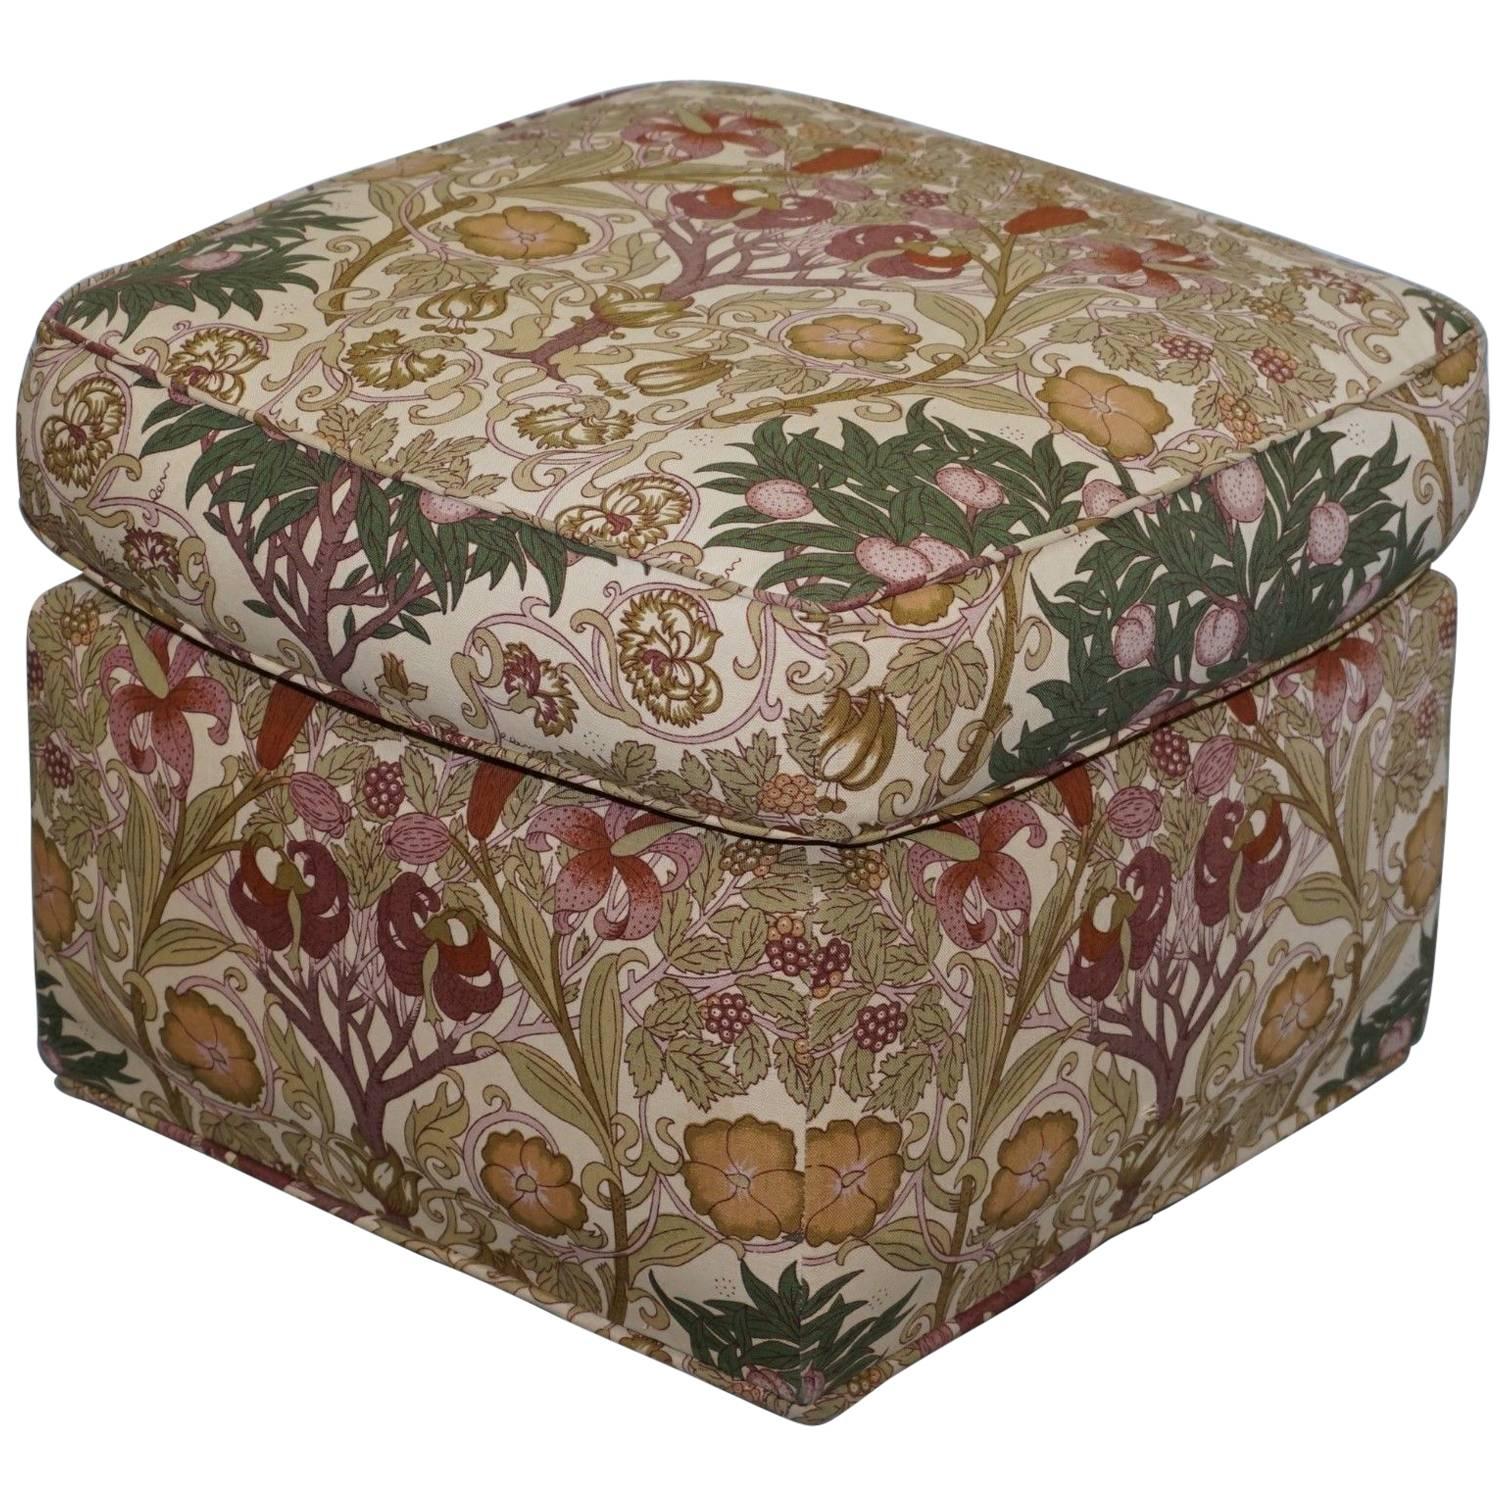 Liberty's London Floral Upholstered Footstool Ottoman Kendrick Part of a Suite